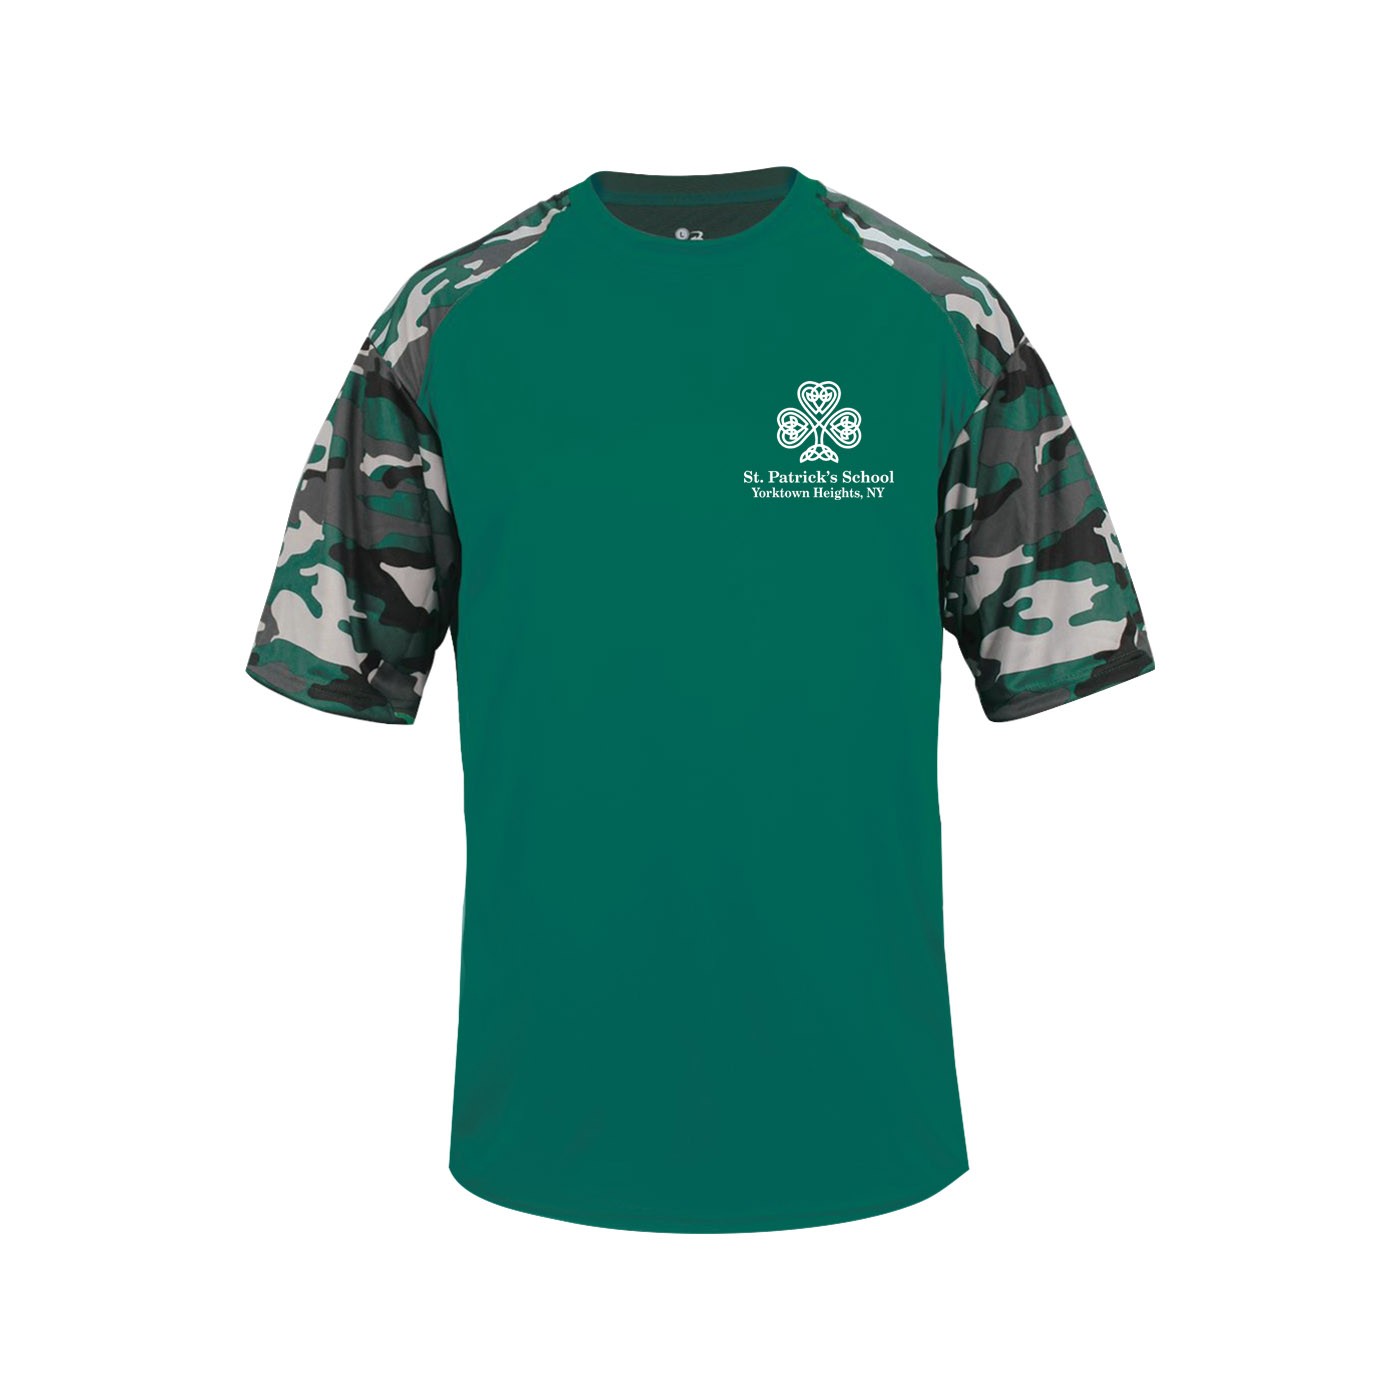 SPS Spirit S/S Camo T-Shirt w/ Left Crest White Logo - Please Allow 2-3 Weeks for Delivery